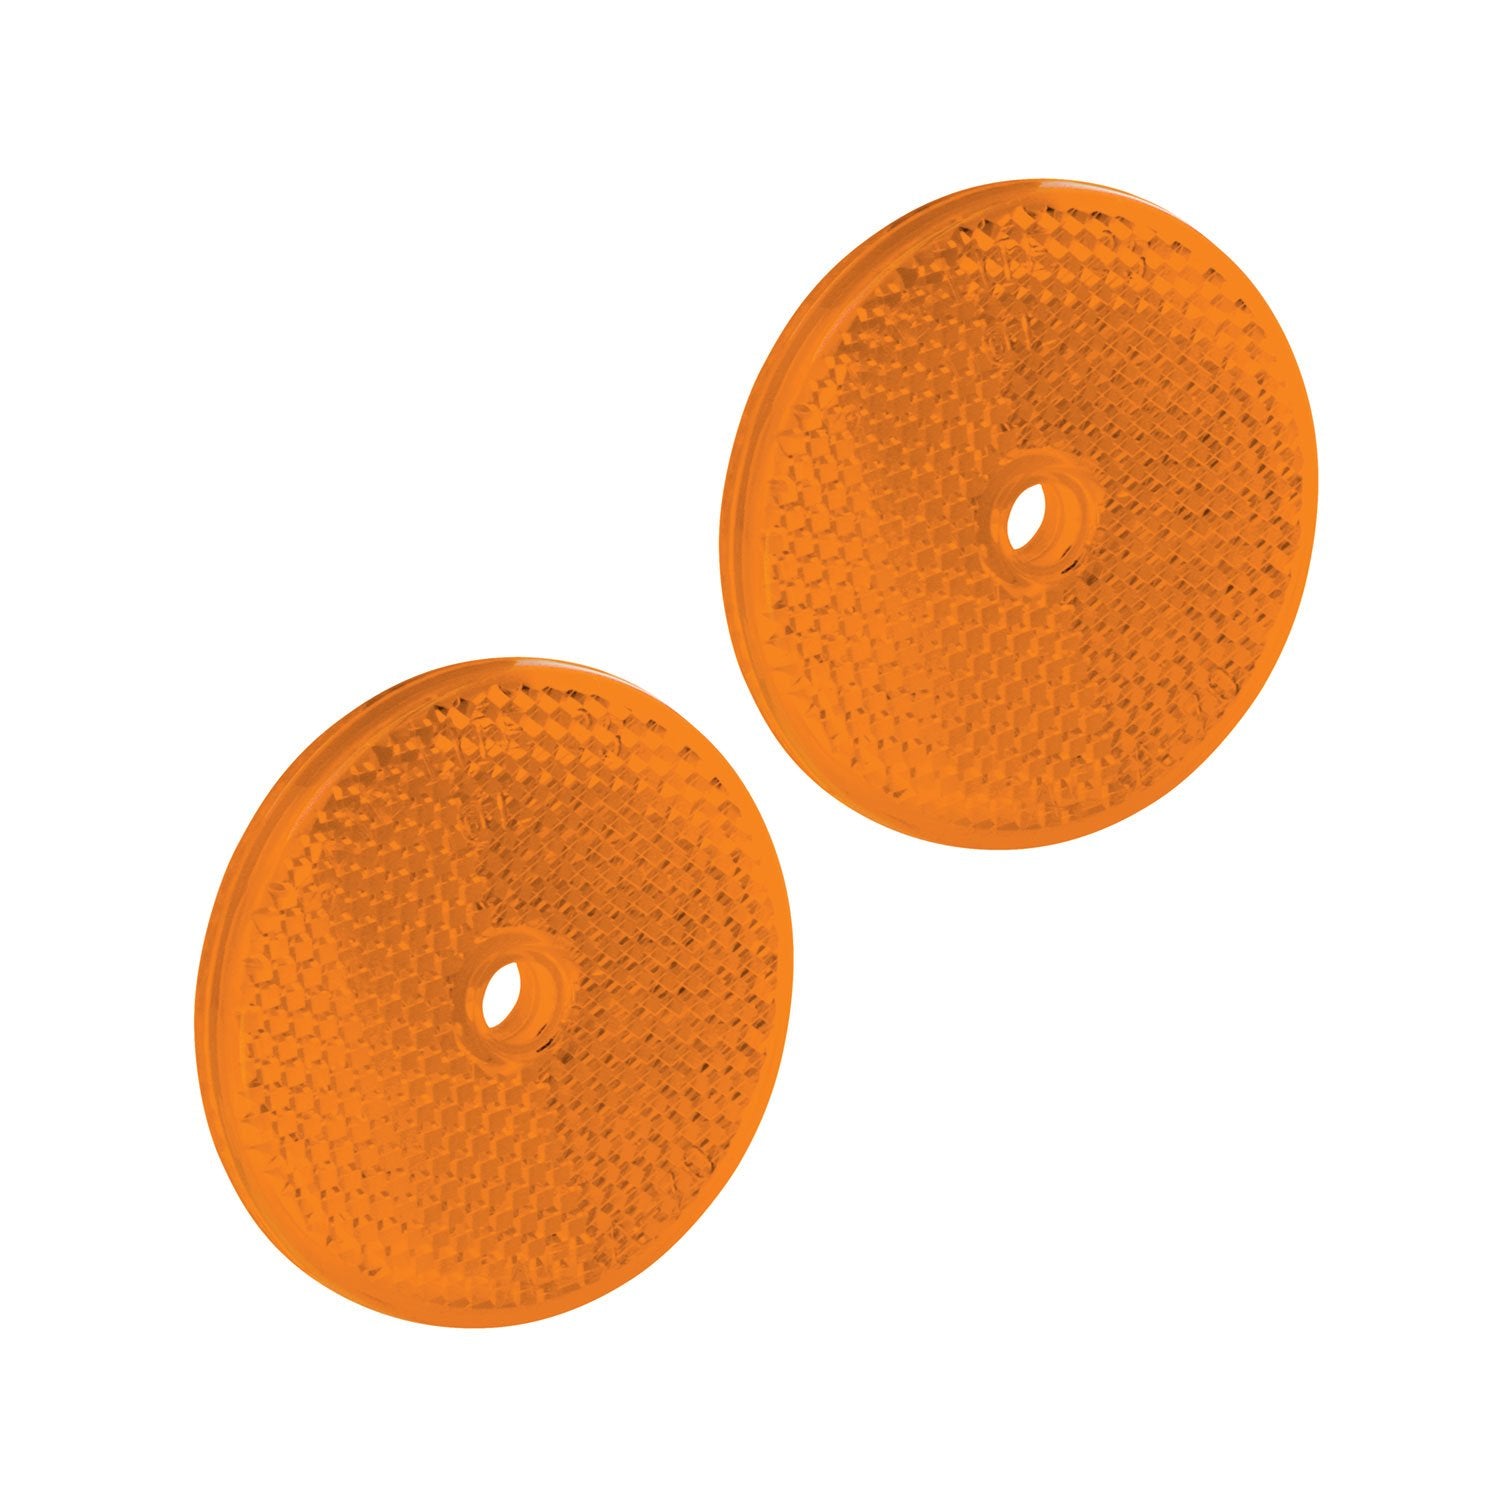 Bargman 74-71-175 Class A 2-3/16" Round Amber Reflector with Center Mounting Hole - 2 Pack